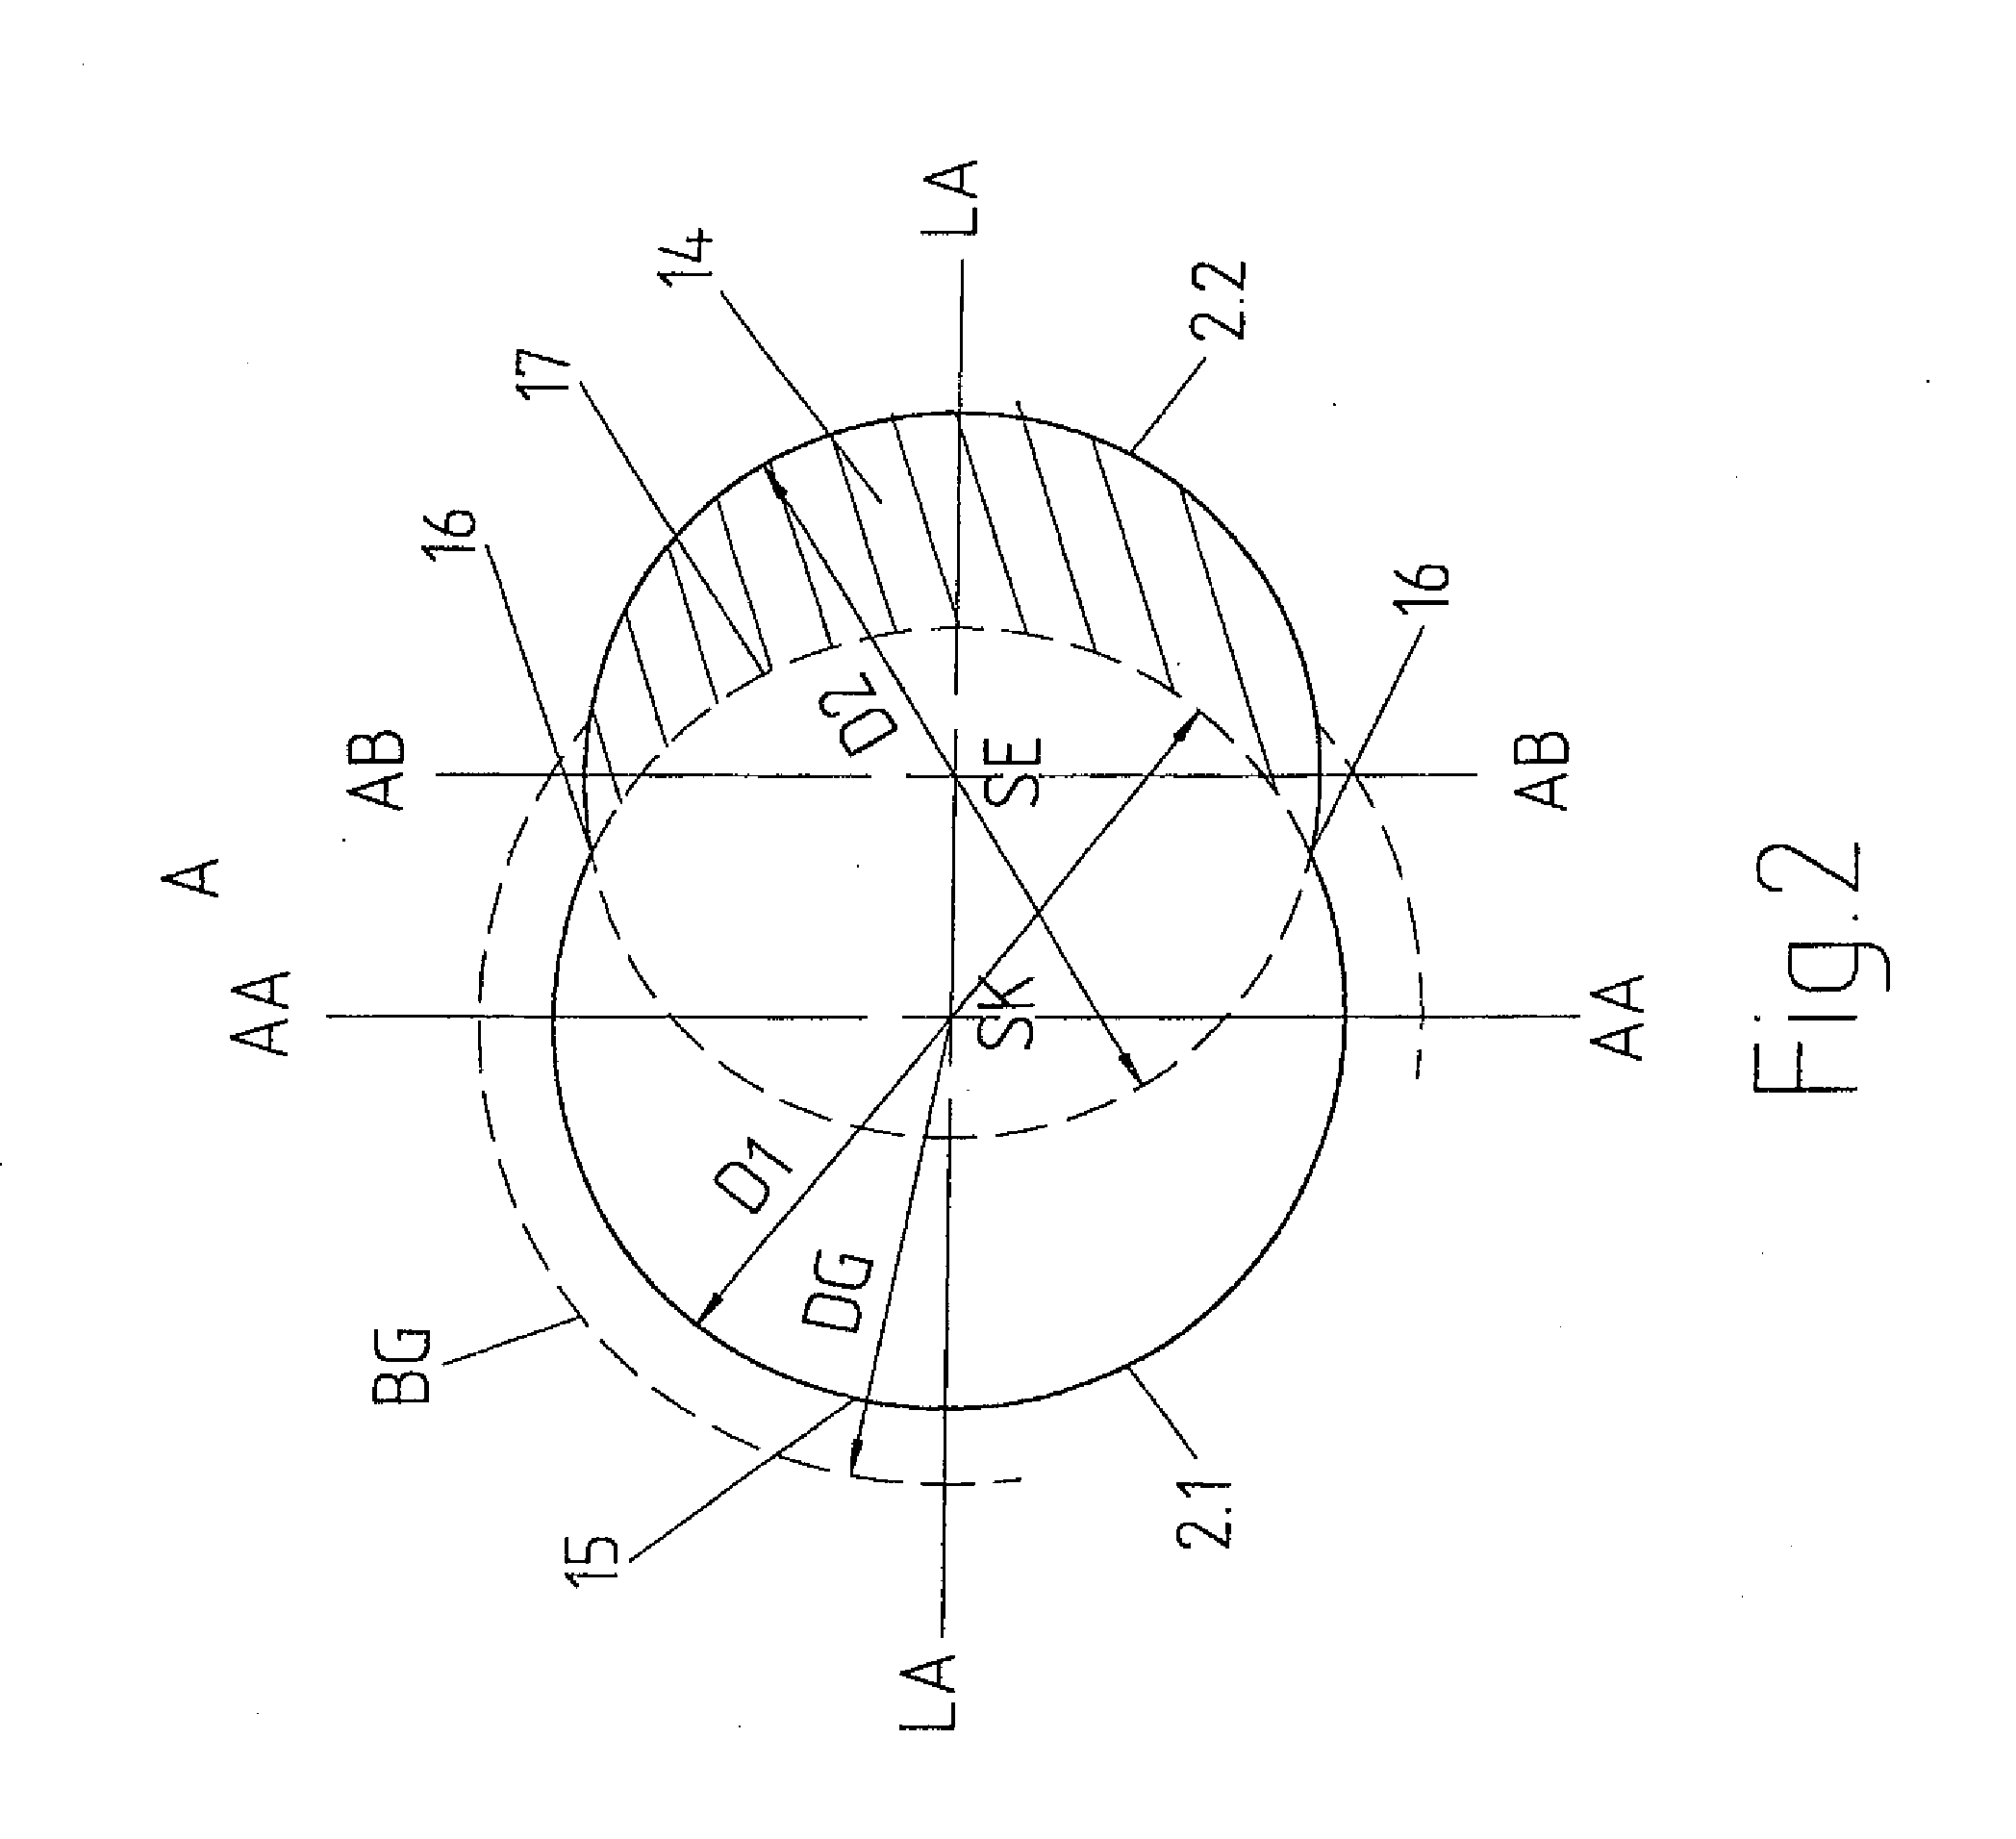 Apparatus for the constant-angle fixation and compression of a fracture or osteotomy of a bone